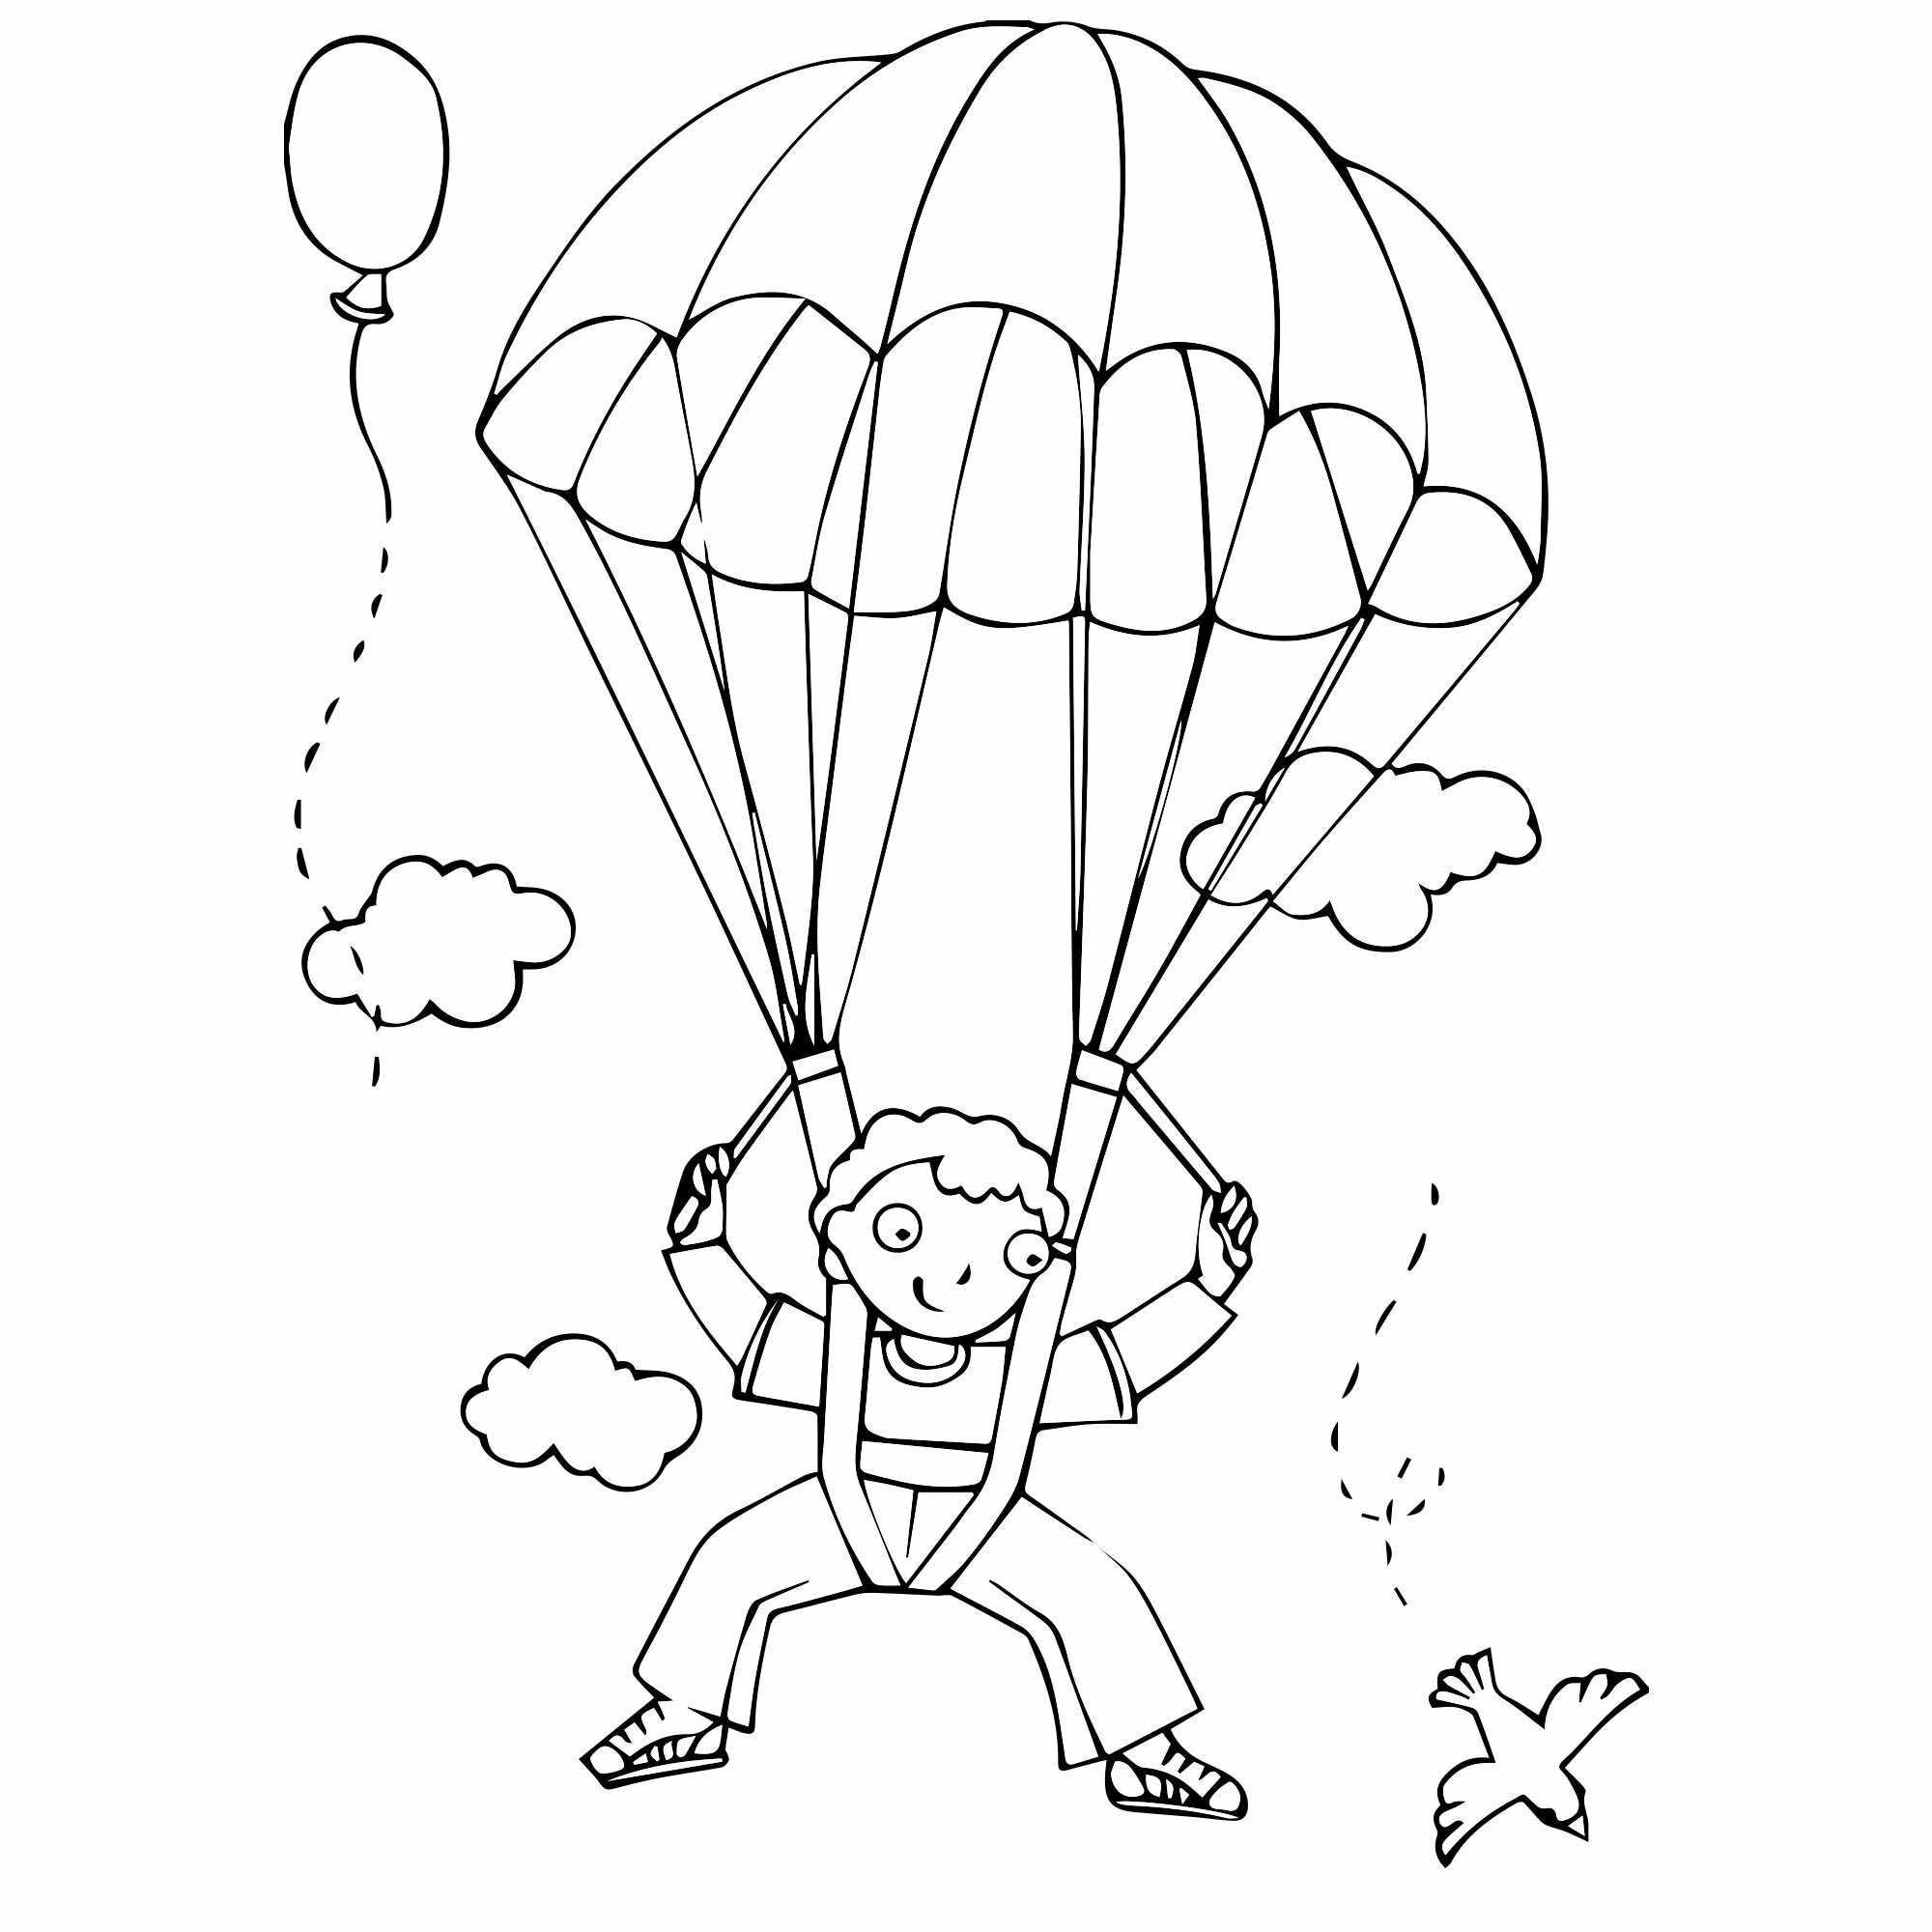 Great parachute coloring book for kids